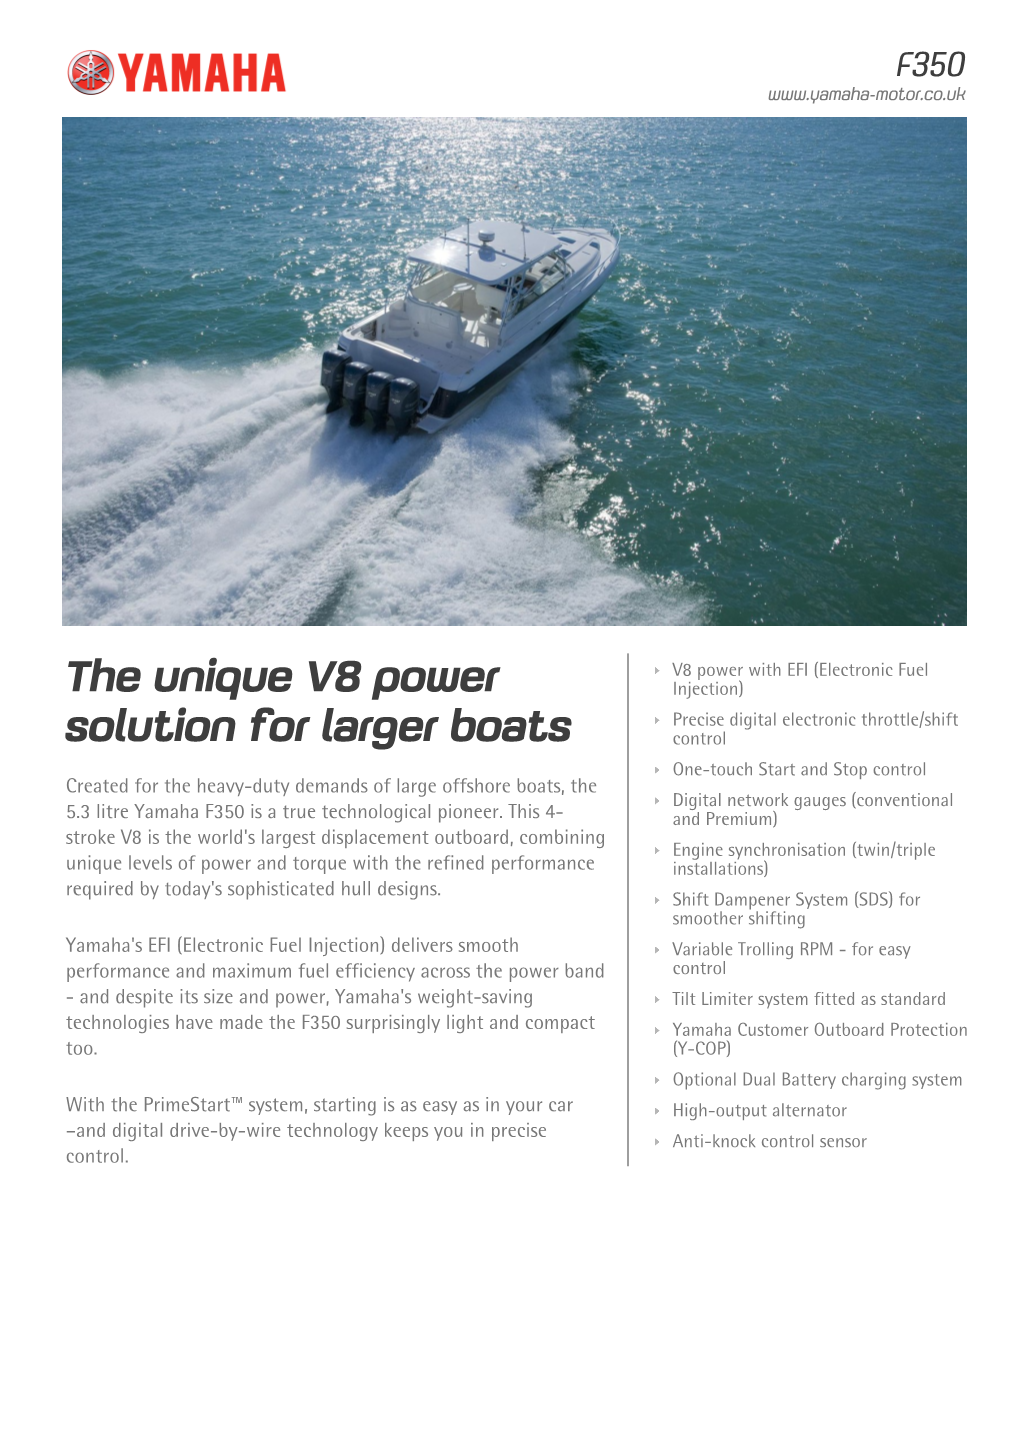 The Unique V8 Power Solution for Larger Boats